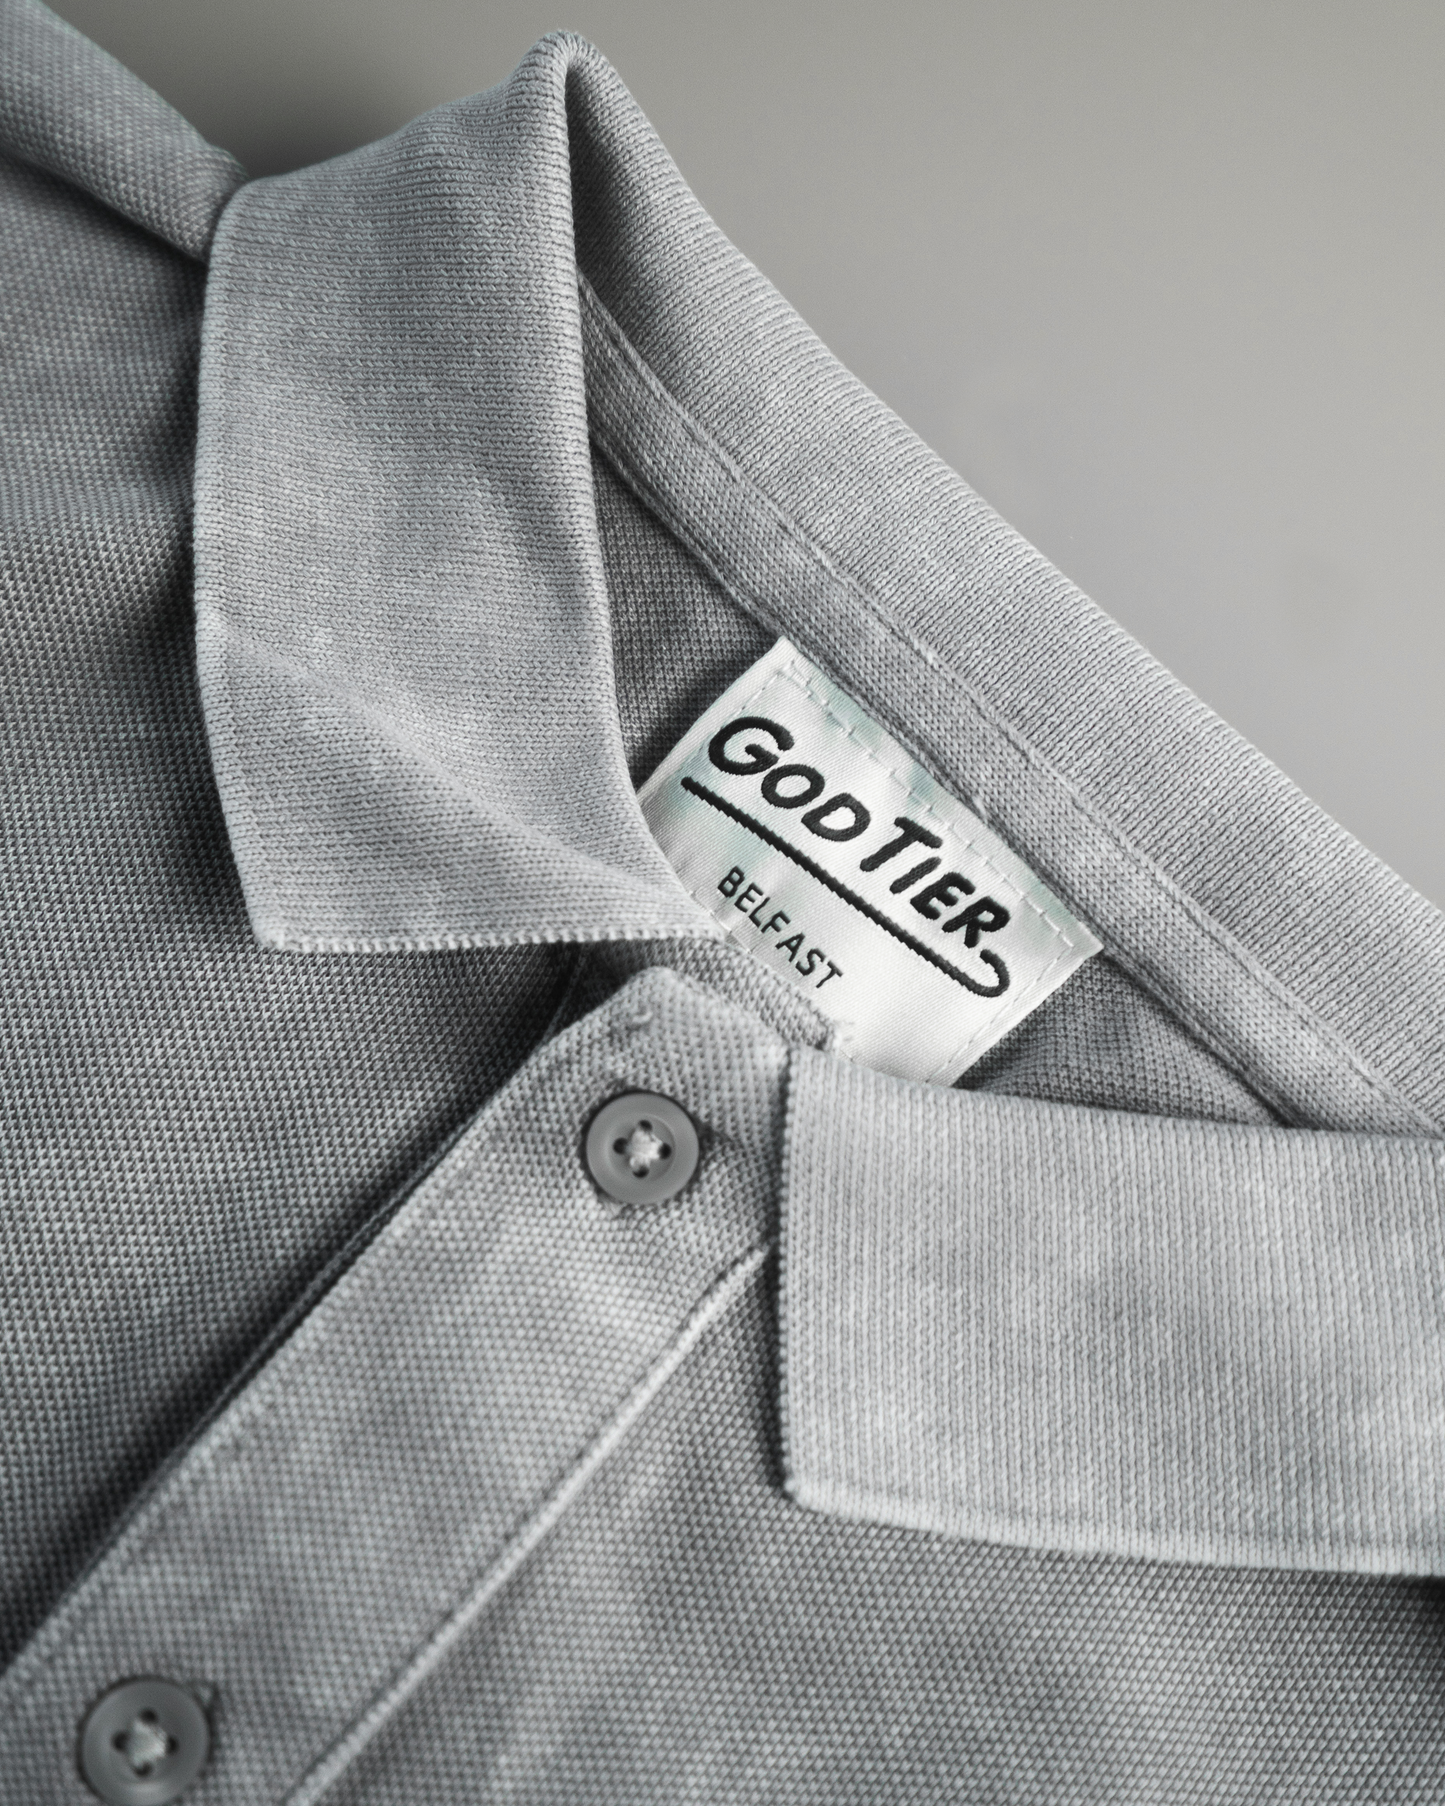 The GT Polo Shirt - Dyed Light Grey